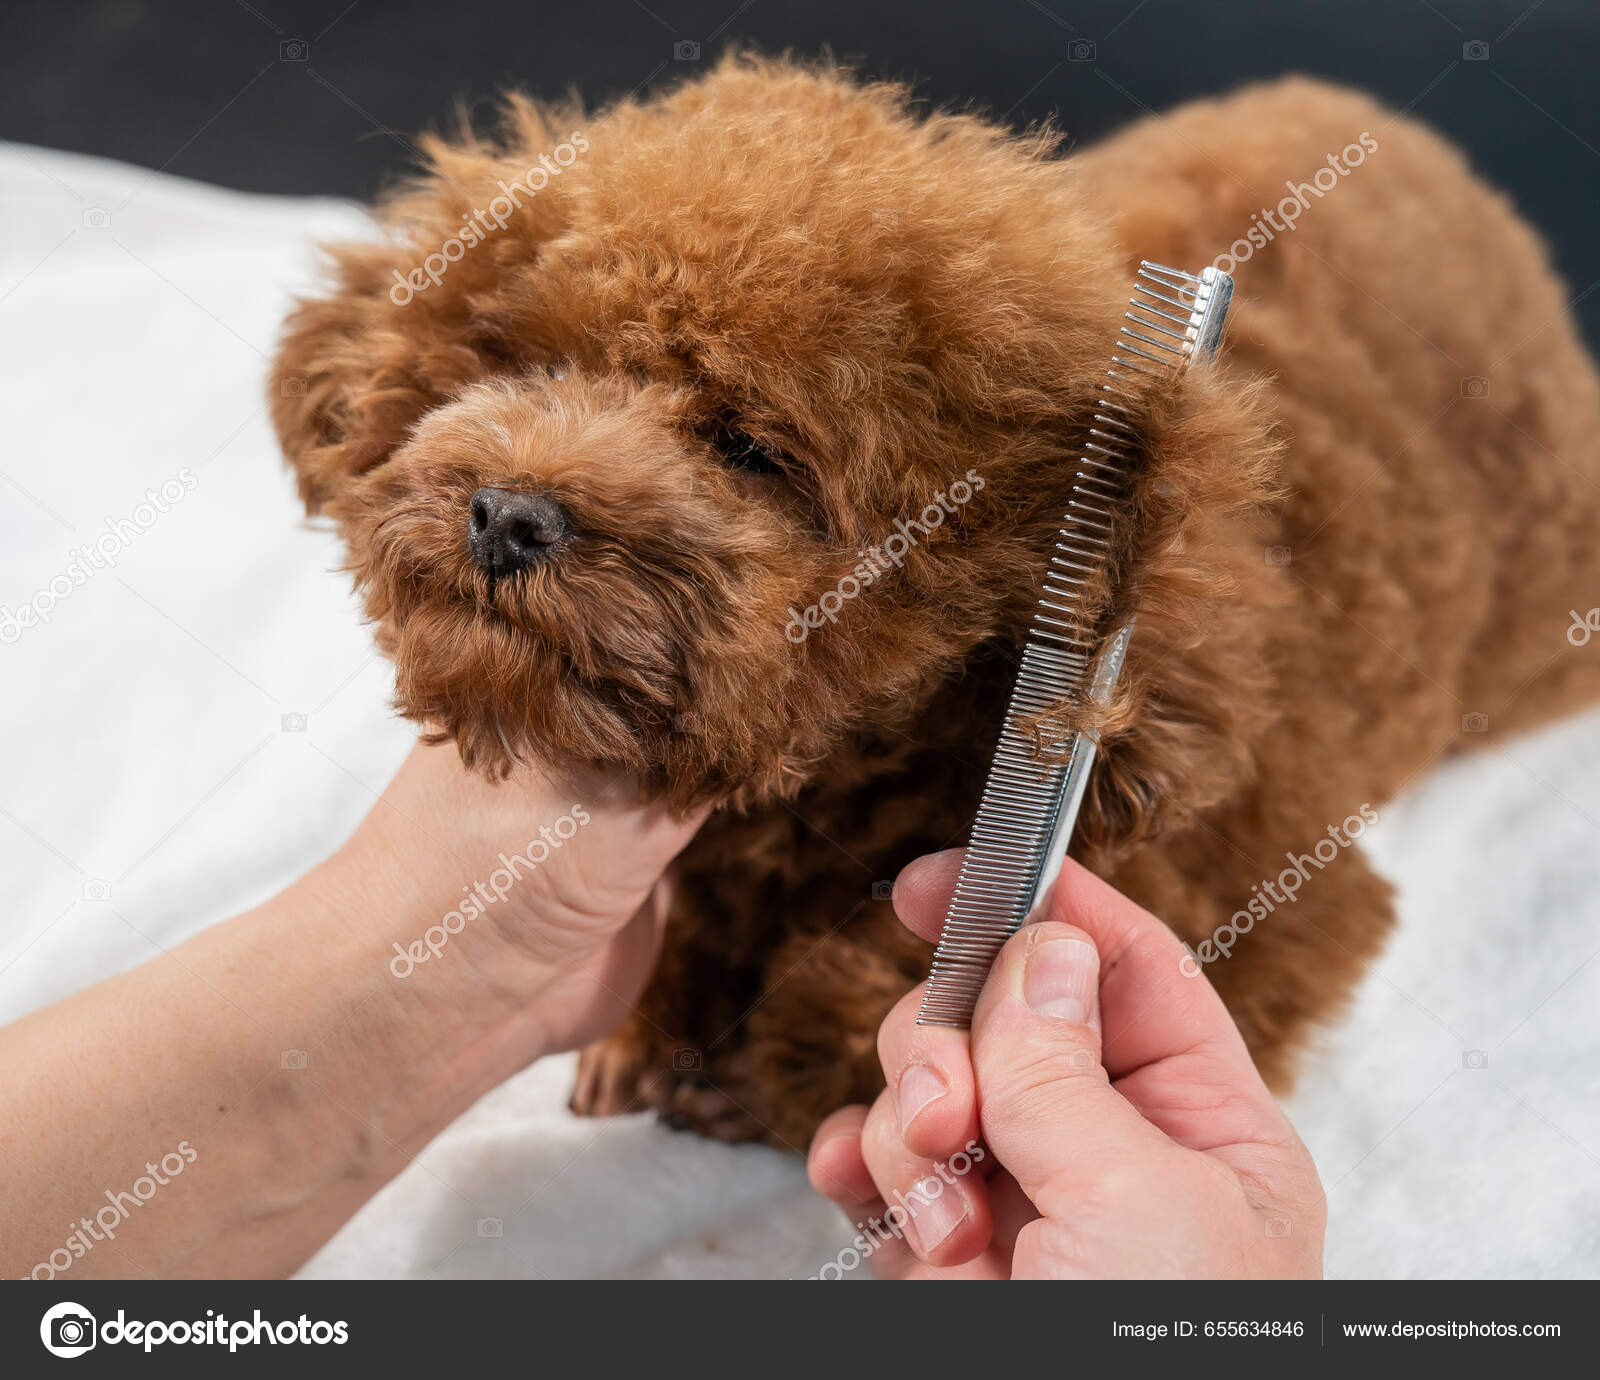 Woman combing a toy poodle during a haircut in a grooming salon.